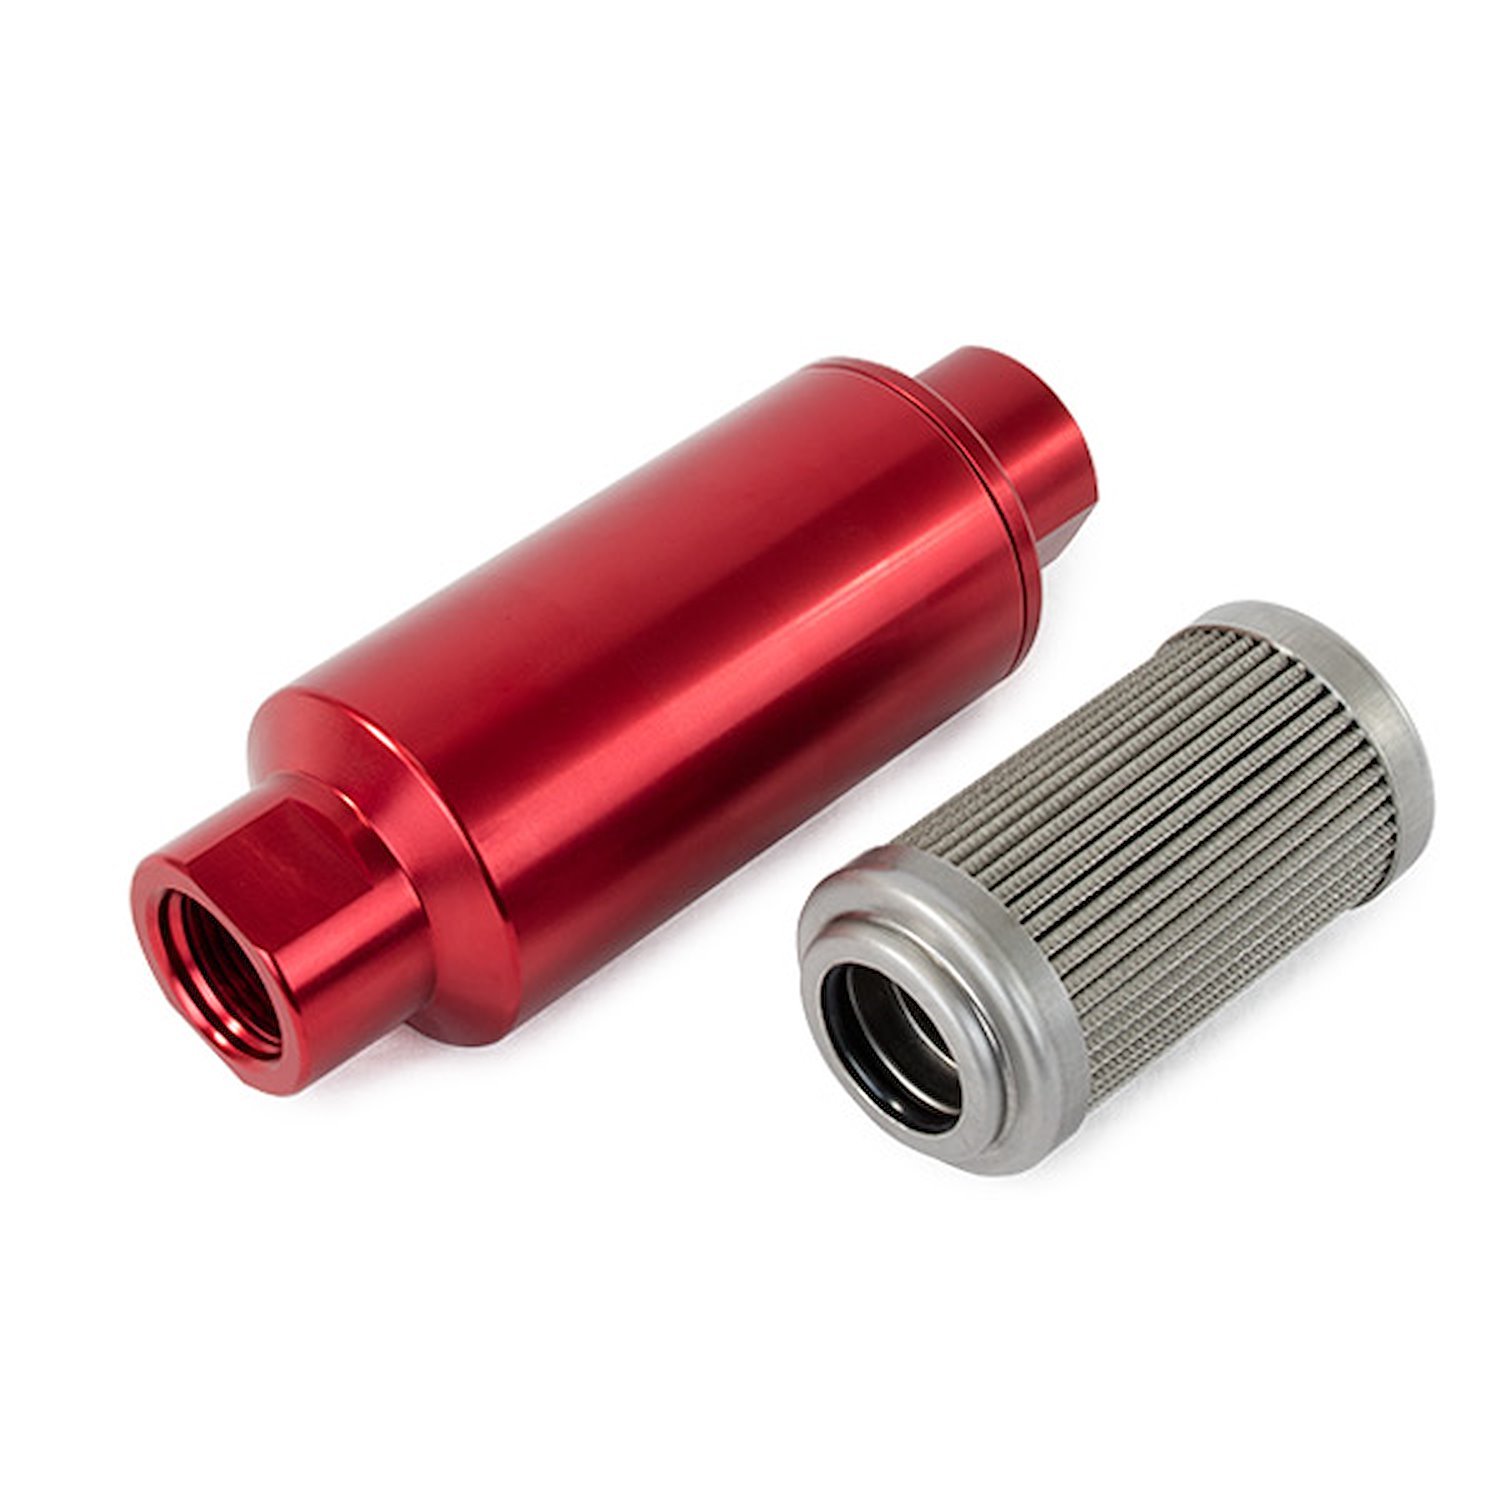 JM1023R Fuel Filter w/ 100 Micron Stainless Steel Element, Red